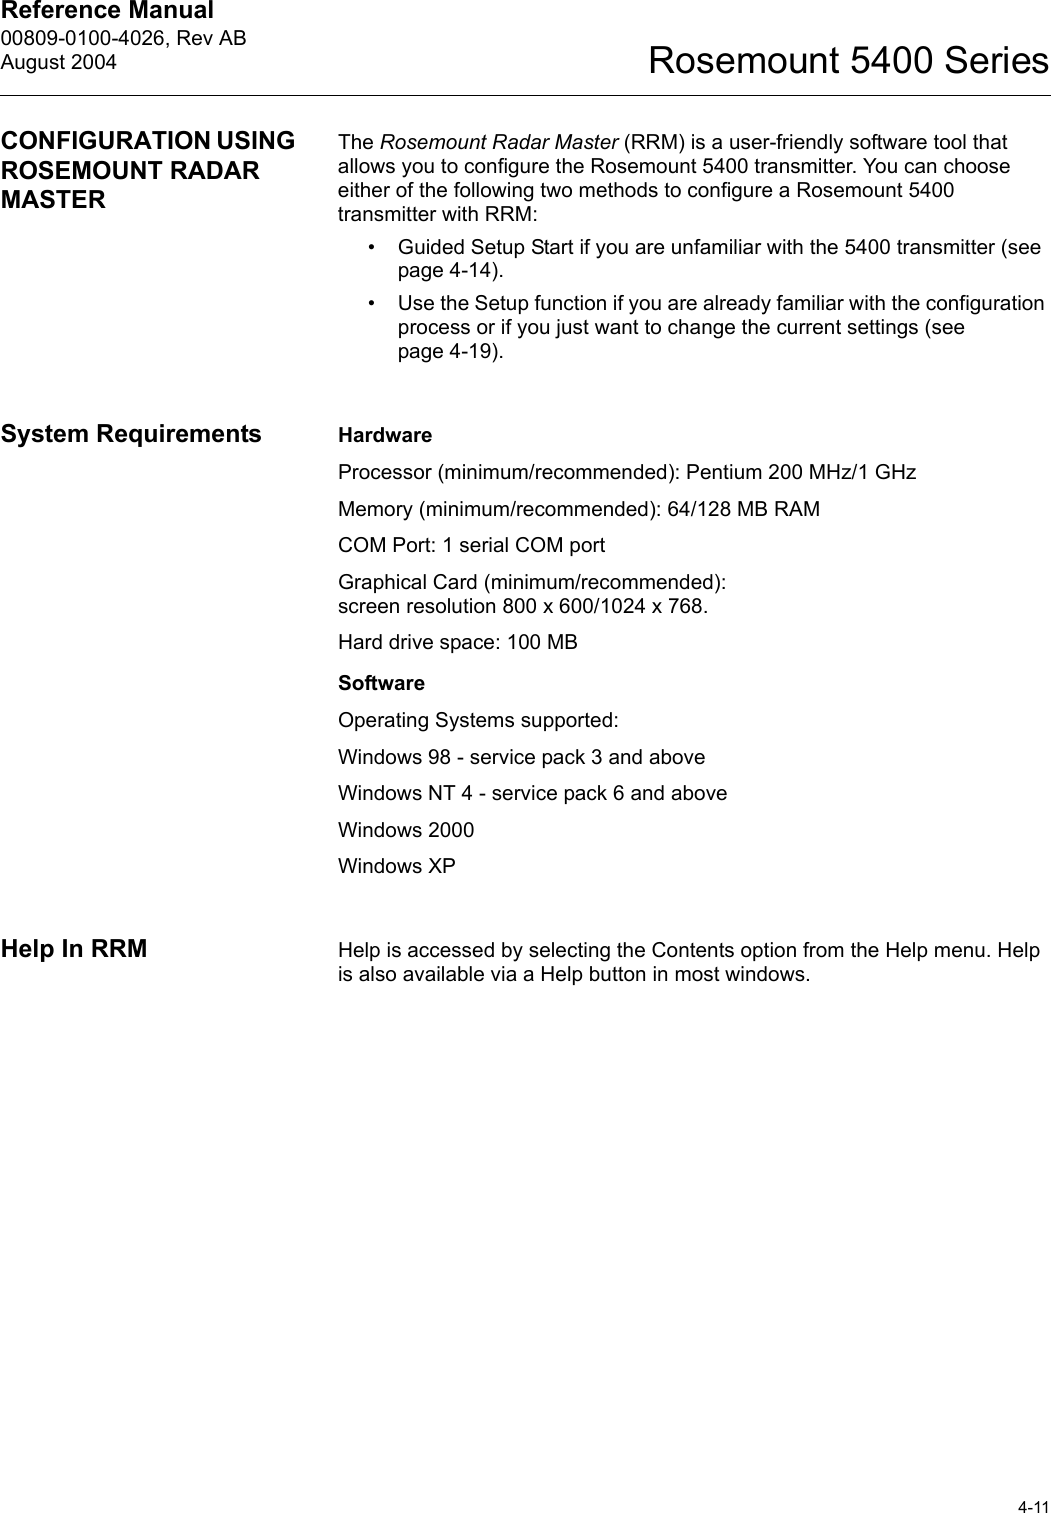 Reference Manual 00809-0100-4026, Rev ABAugust 20044-11Rosemount 5400 SeriesCONFIGURATION USING ROSEMOUNT RADAR MASTERThe Rosemount Radar Master (RRM) is a user-friendly software tool that allows you to configure the Rosemount 5400 transmitter. You can choose either of the following two methods to configure a Rosemount 5400 transmitter with RRM: • Guided Setup Start if you are unfamiliar with the 5400 transmitter (see page 4-14).• Use the Setup function if you are already familiar with the configuration process or if you just want to change the current settings (see page 4-19).System Requirements HardwareProcessor (minimum/recommended): Pentium 200 MHz/1 GHzMemory (minimum/recommended): 64/128 MB RAMCOM Port: 1 serial COM portGraphical Card (minimum/recommended): screen resolution 800 x 600/1024 x 768.Hard drive space: 100 MBSoftwareOperating Systems supported:Windows 98 - service pack 3 and aboveWindows NT 4 - service pack 6 and above Windows 2000Windows XPHelp In RRM Help is accessed by selecting the Contents option from the Help menu. Help is also available via a Help button in most windows.